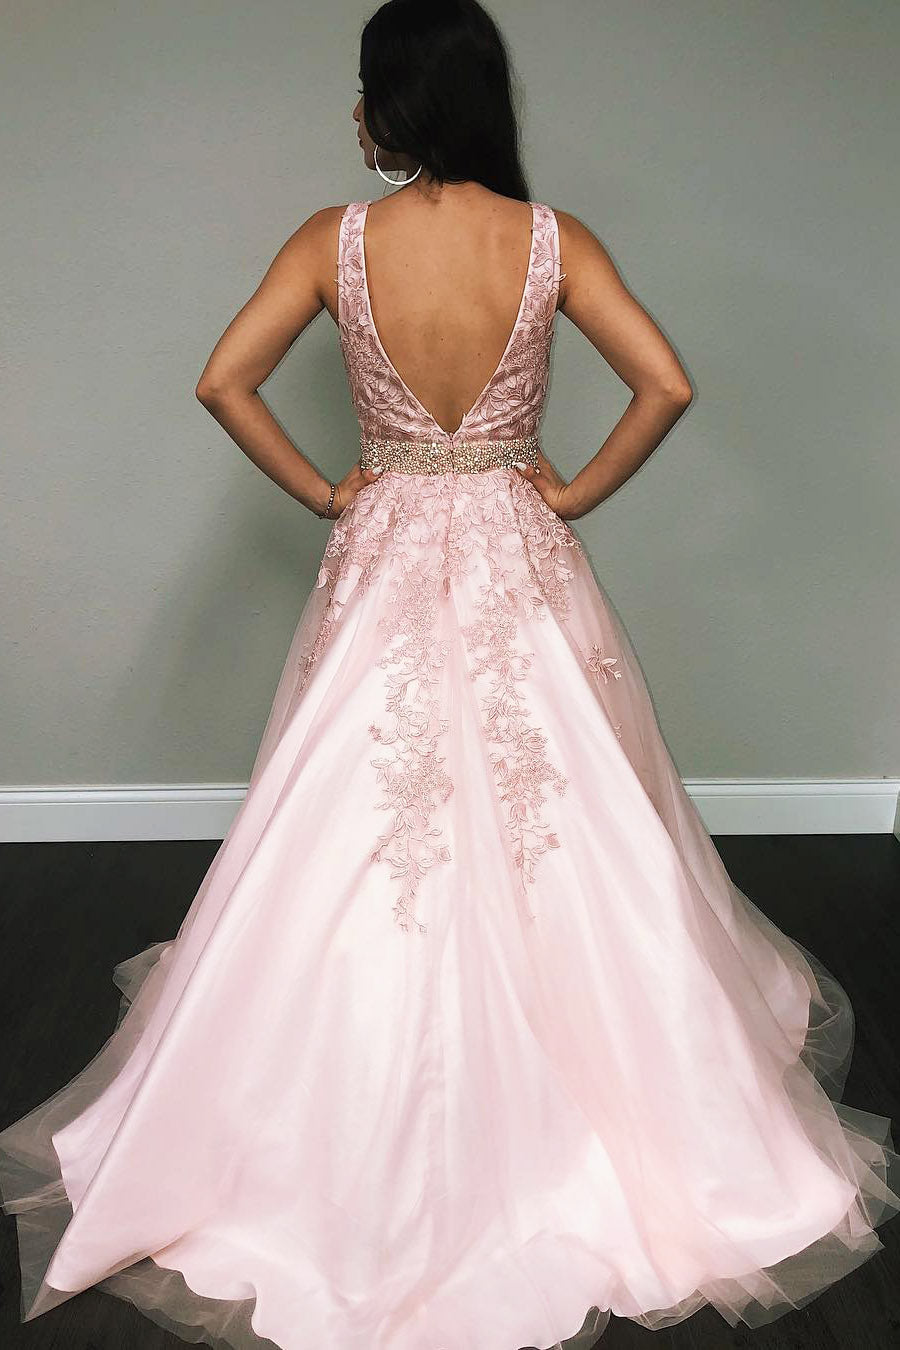 V-Neck Beaded Belt Pink Long Prom Dress with Lace Appliques